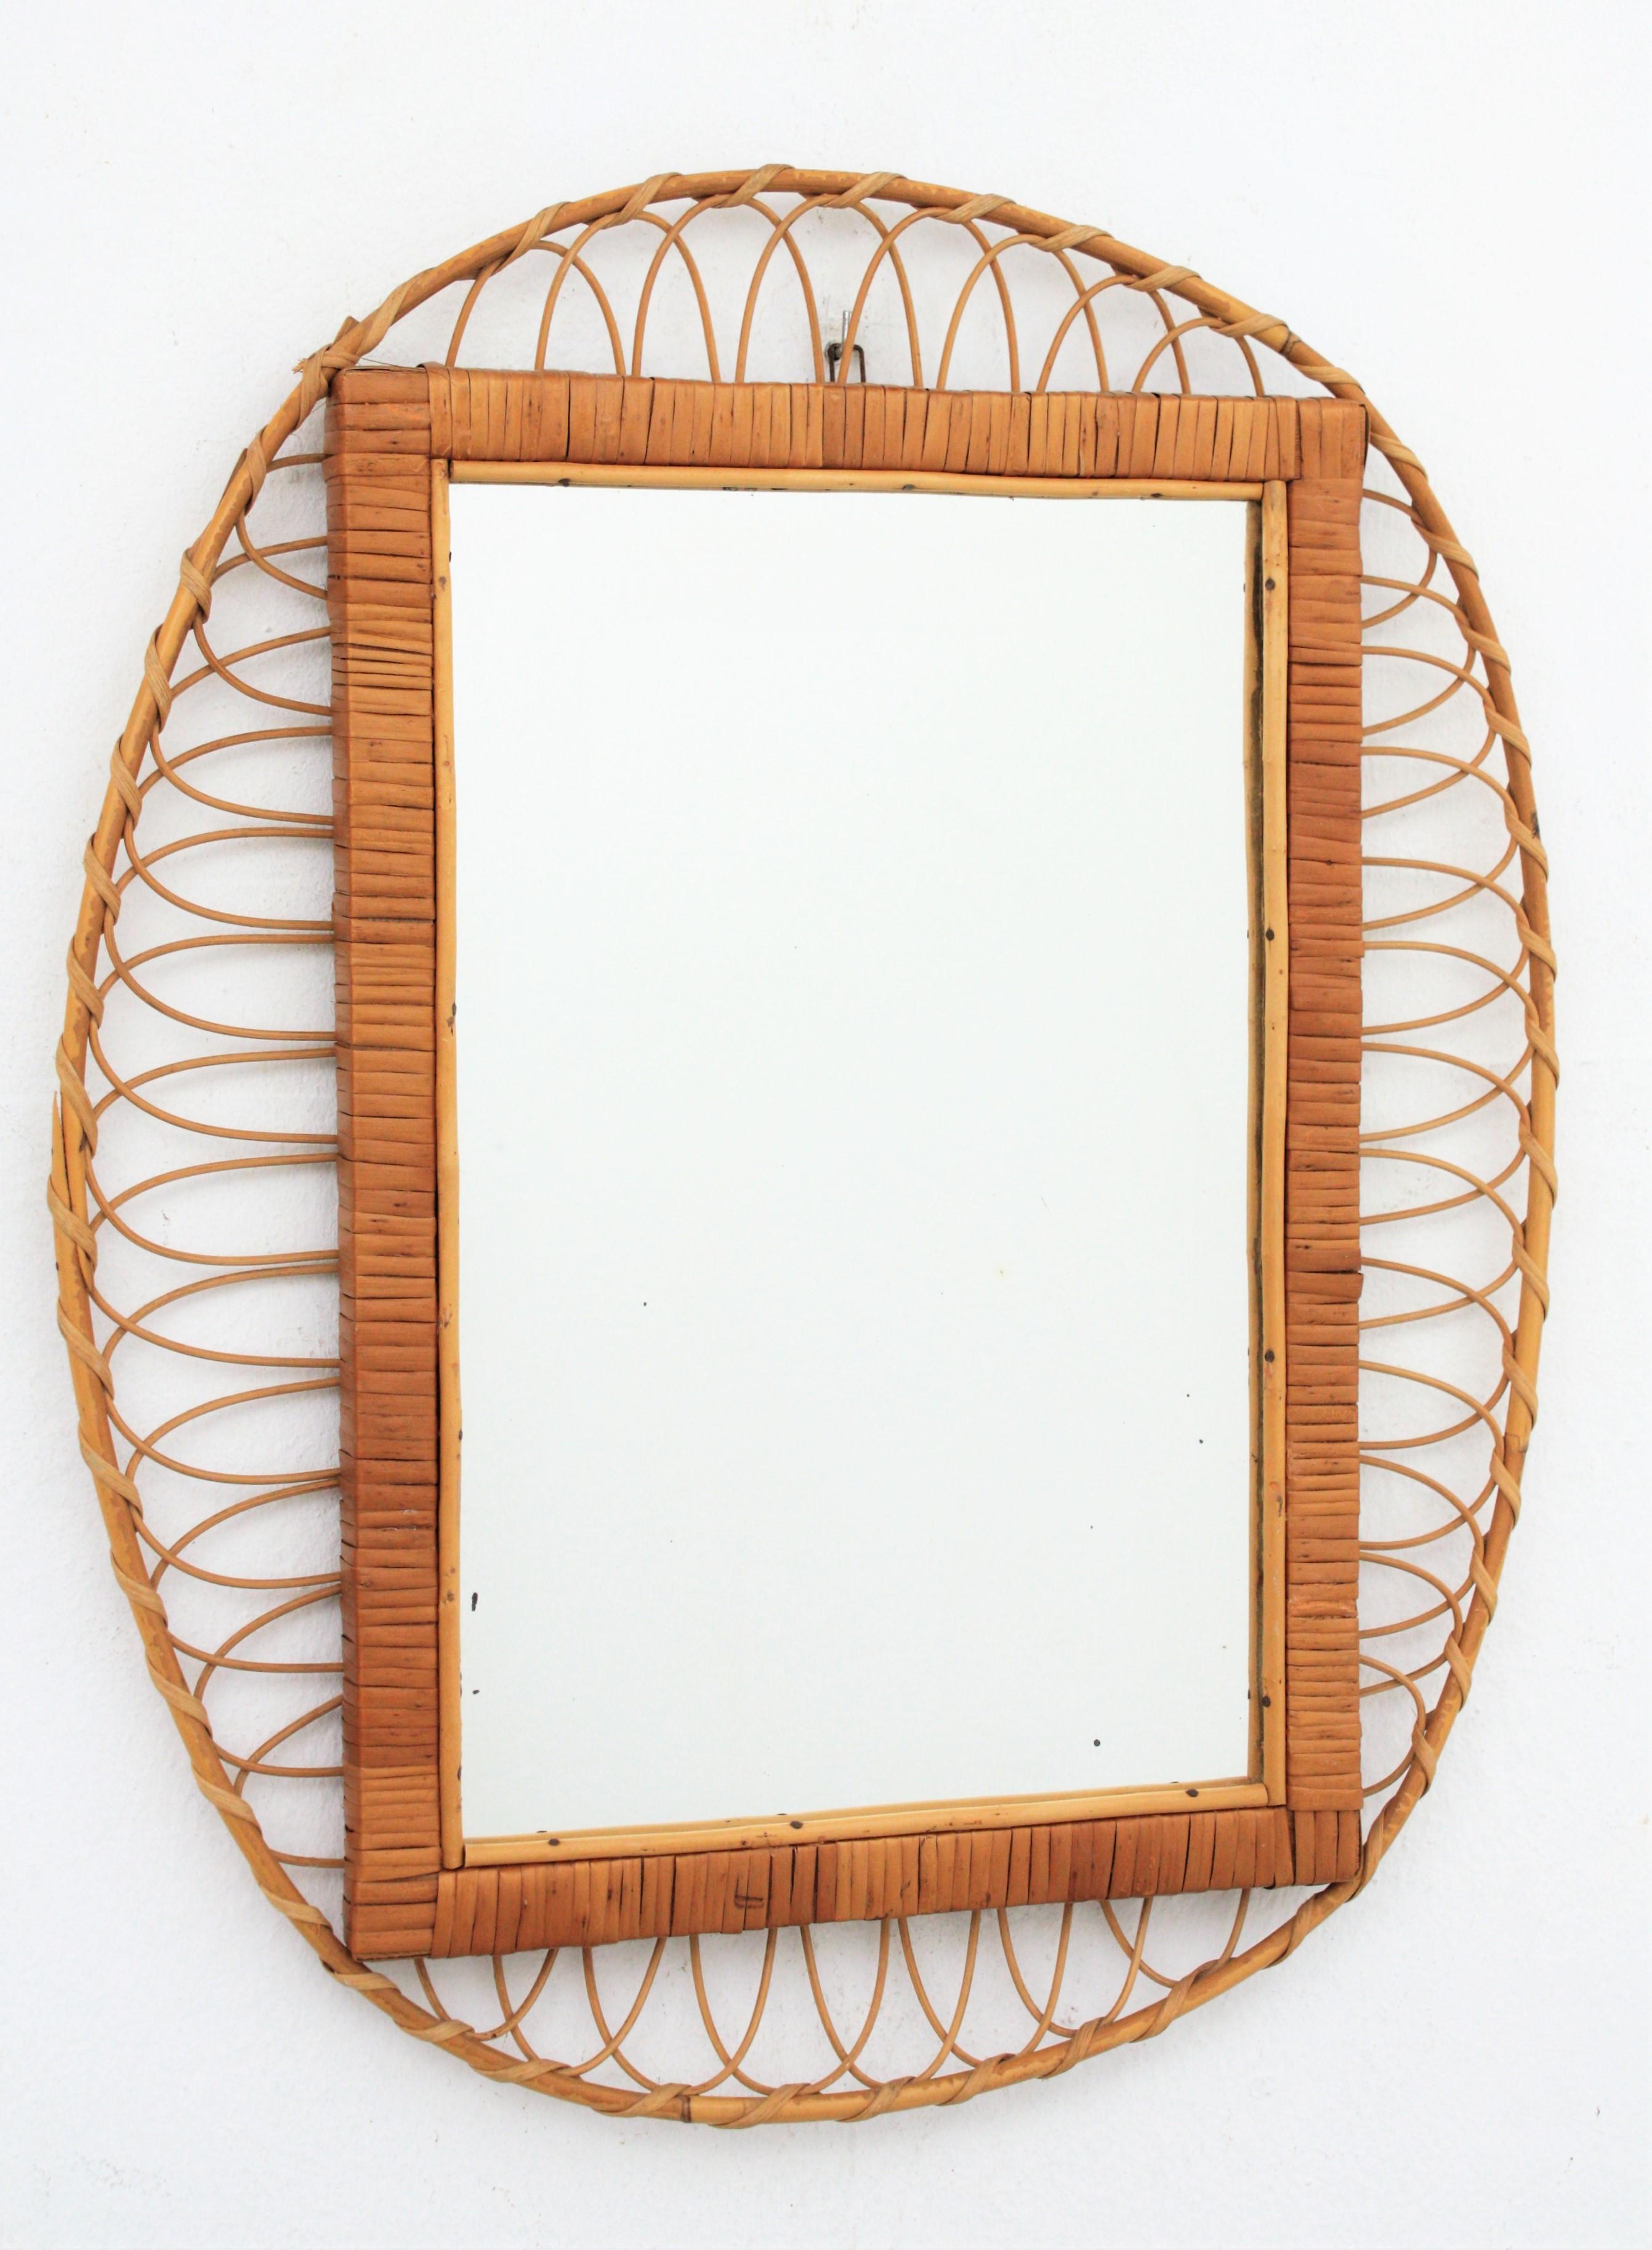 1960s handcrafted French Riviera rectangular mirror with oval rattan frame
This handcrafted mirror is made by a rattan oval frame surrounding a rectangular glass wraped with rattan.
This mirror has all the taste of the Midcentury French Riviera